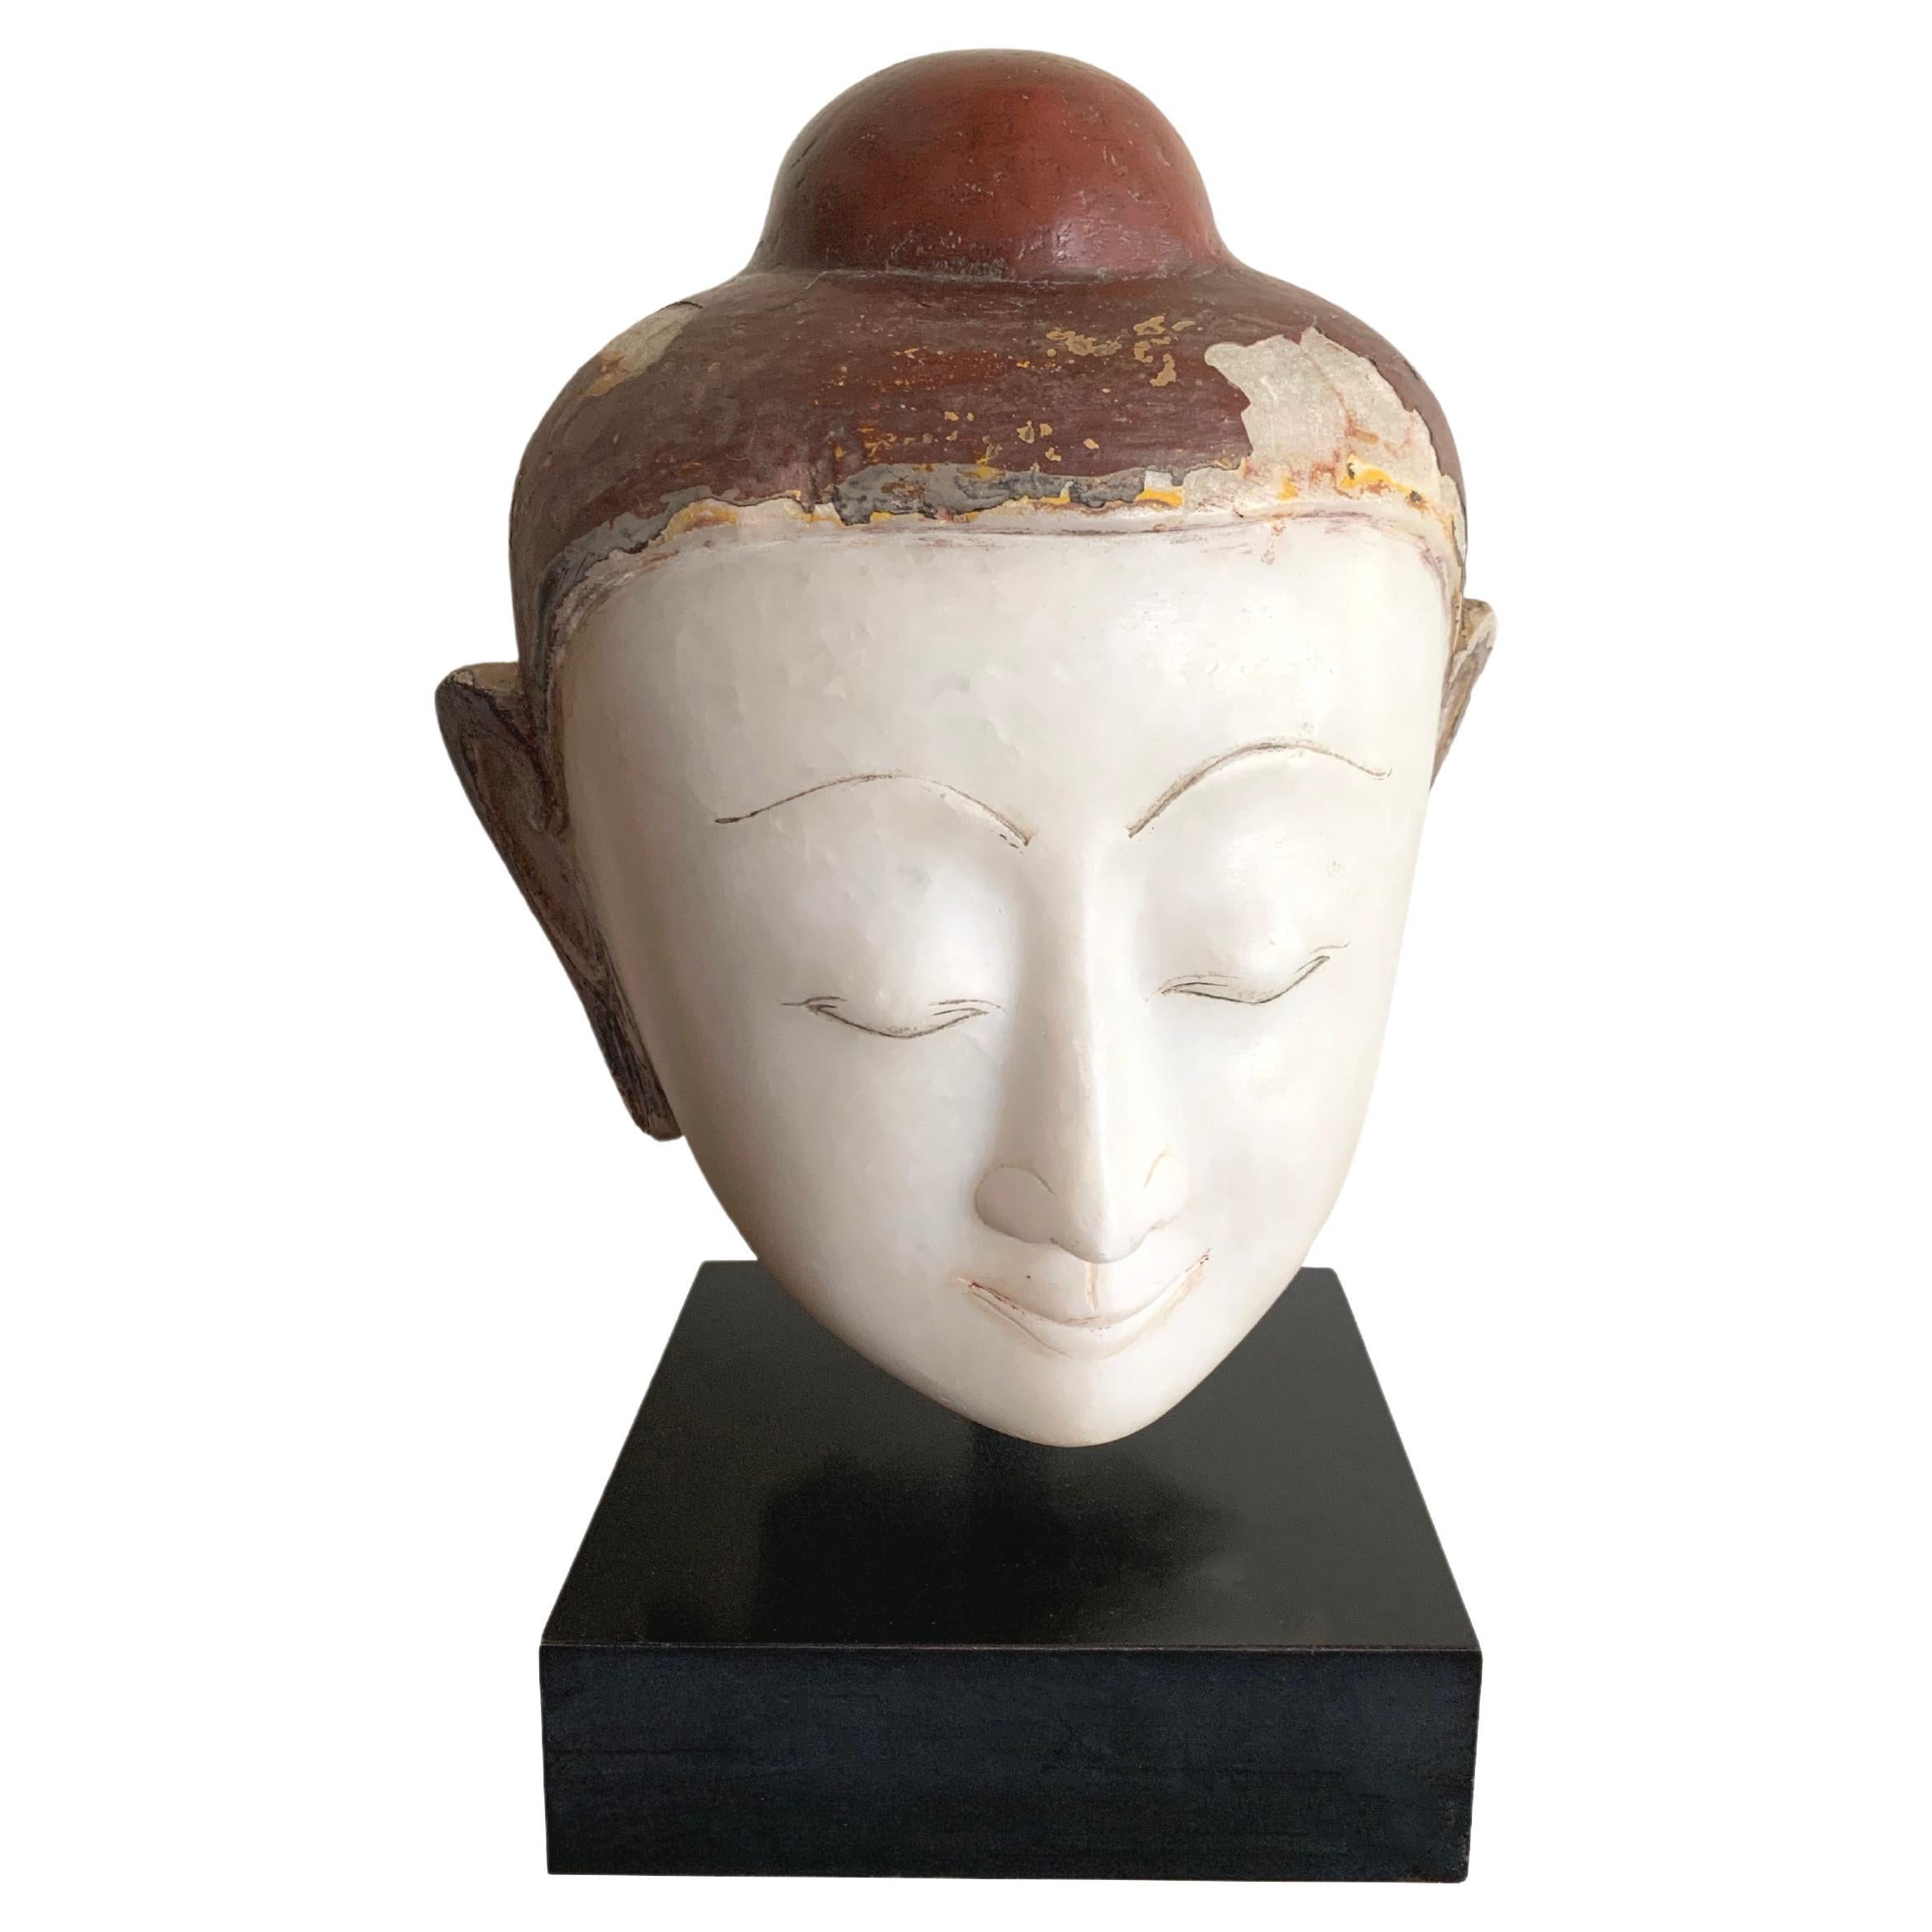 Incredible vintage hand carved alabaster marble Buddha head sculpture